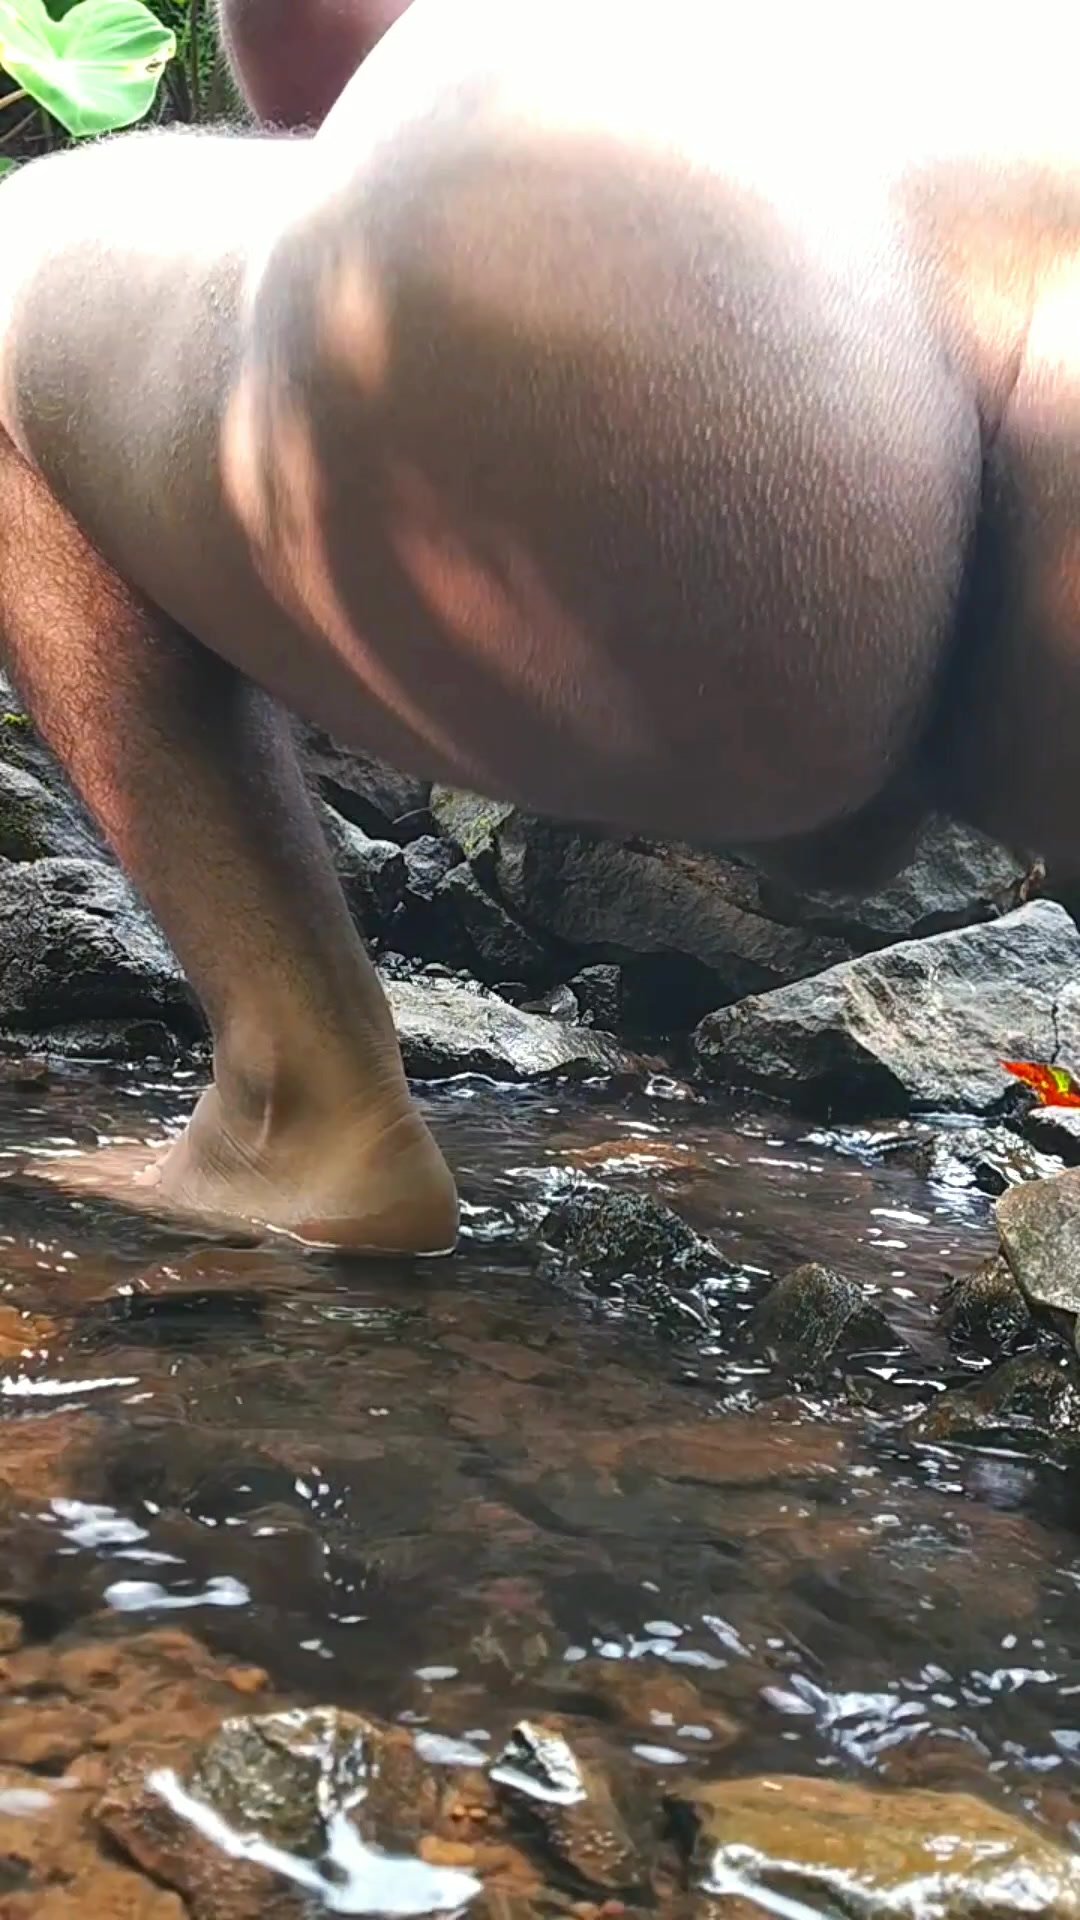 Indian style pooping and washing ass in the jungle